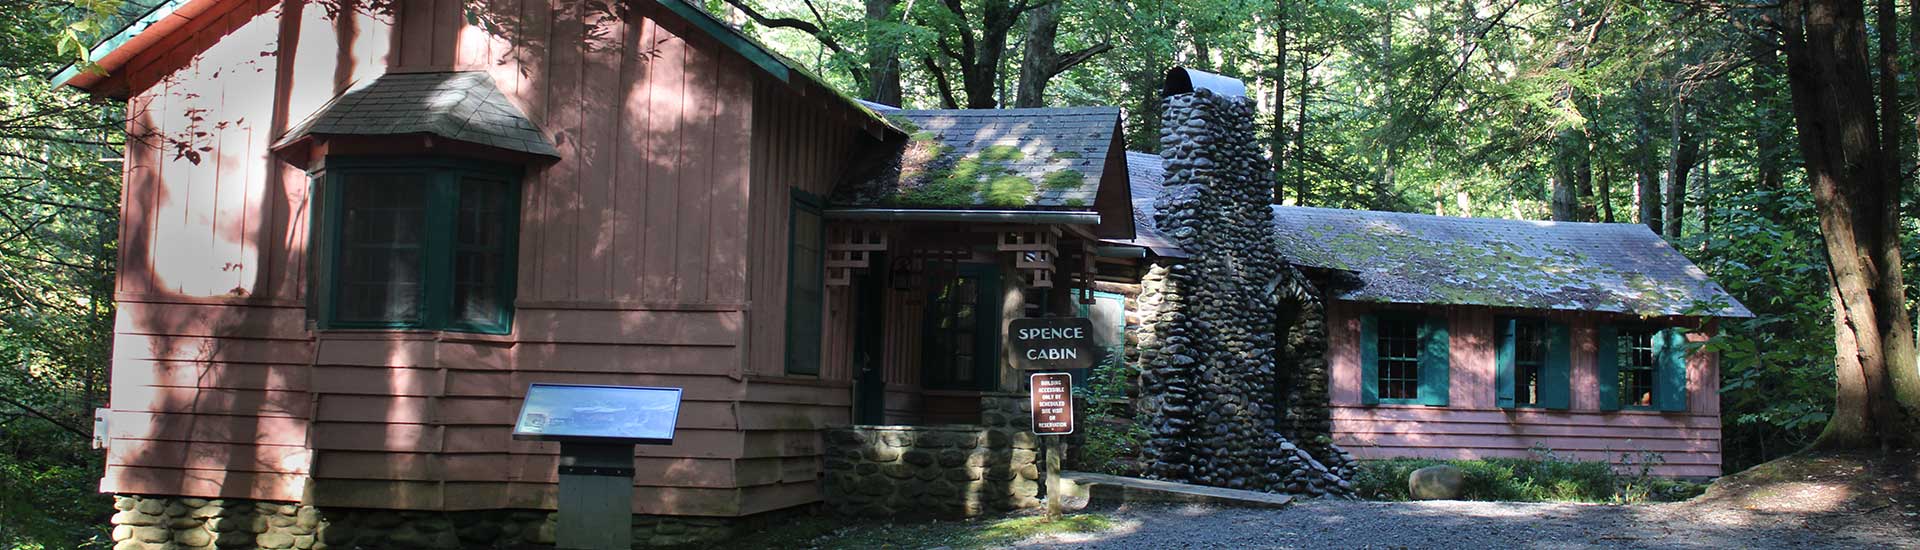 Spence Cabin River Lodge in the Elkmont Historic District, Great Smoky Mountains National Park near Gatlinburg, TN.